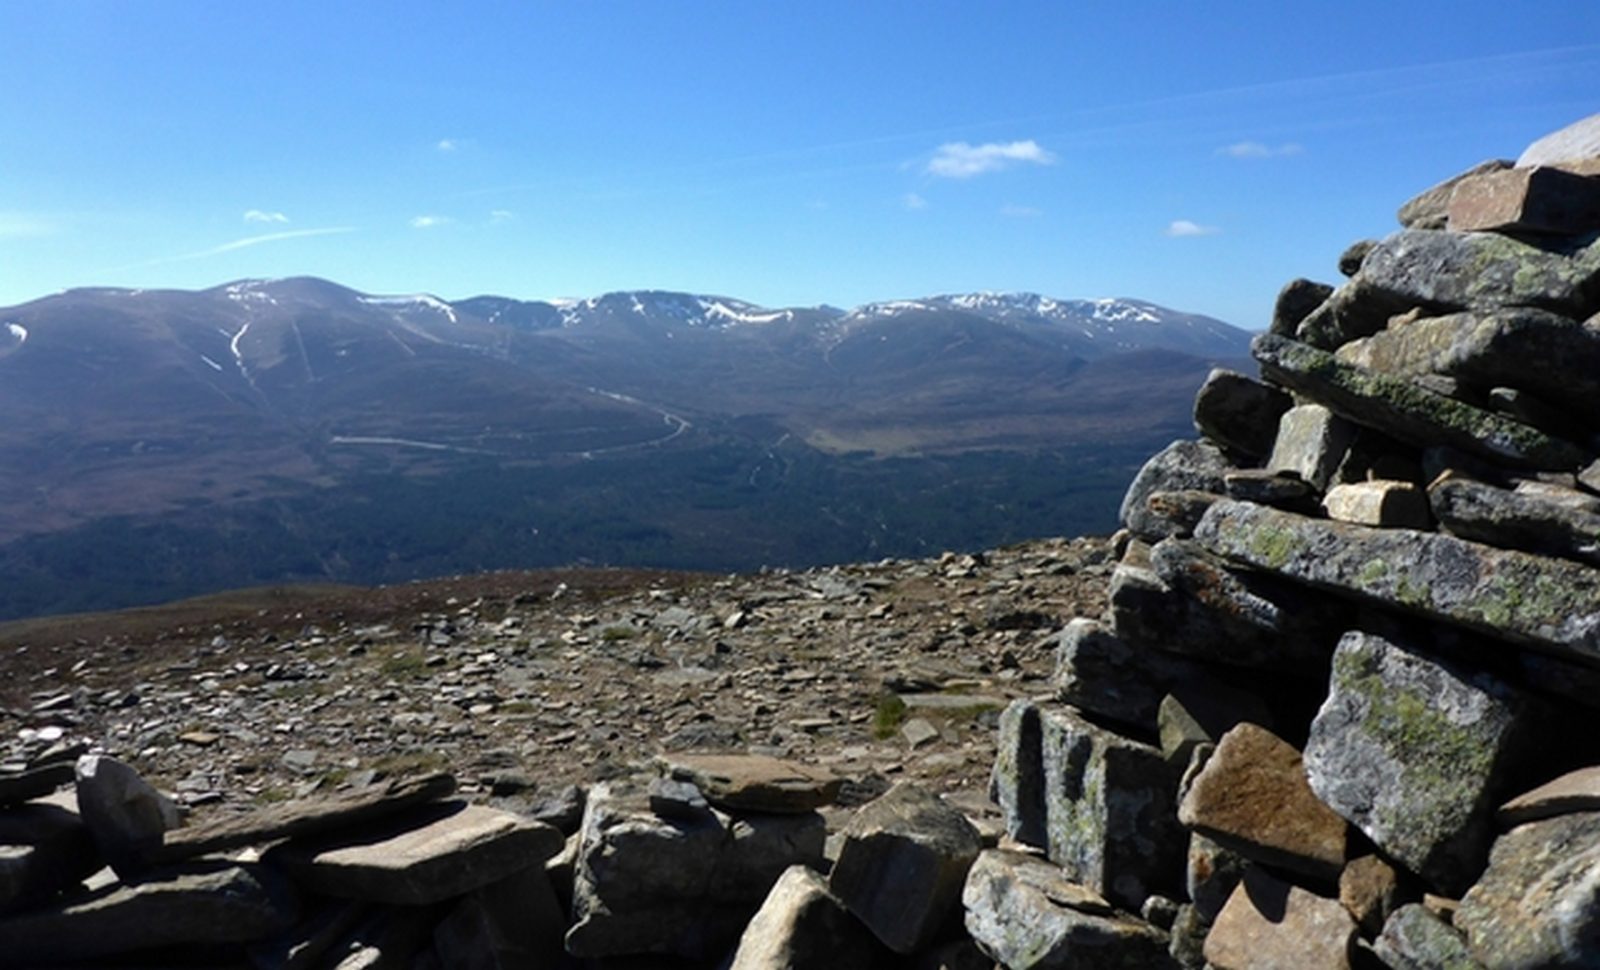 Walk up Meall a'Bhuachaille from Glenmore Lodge